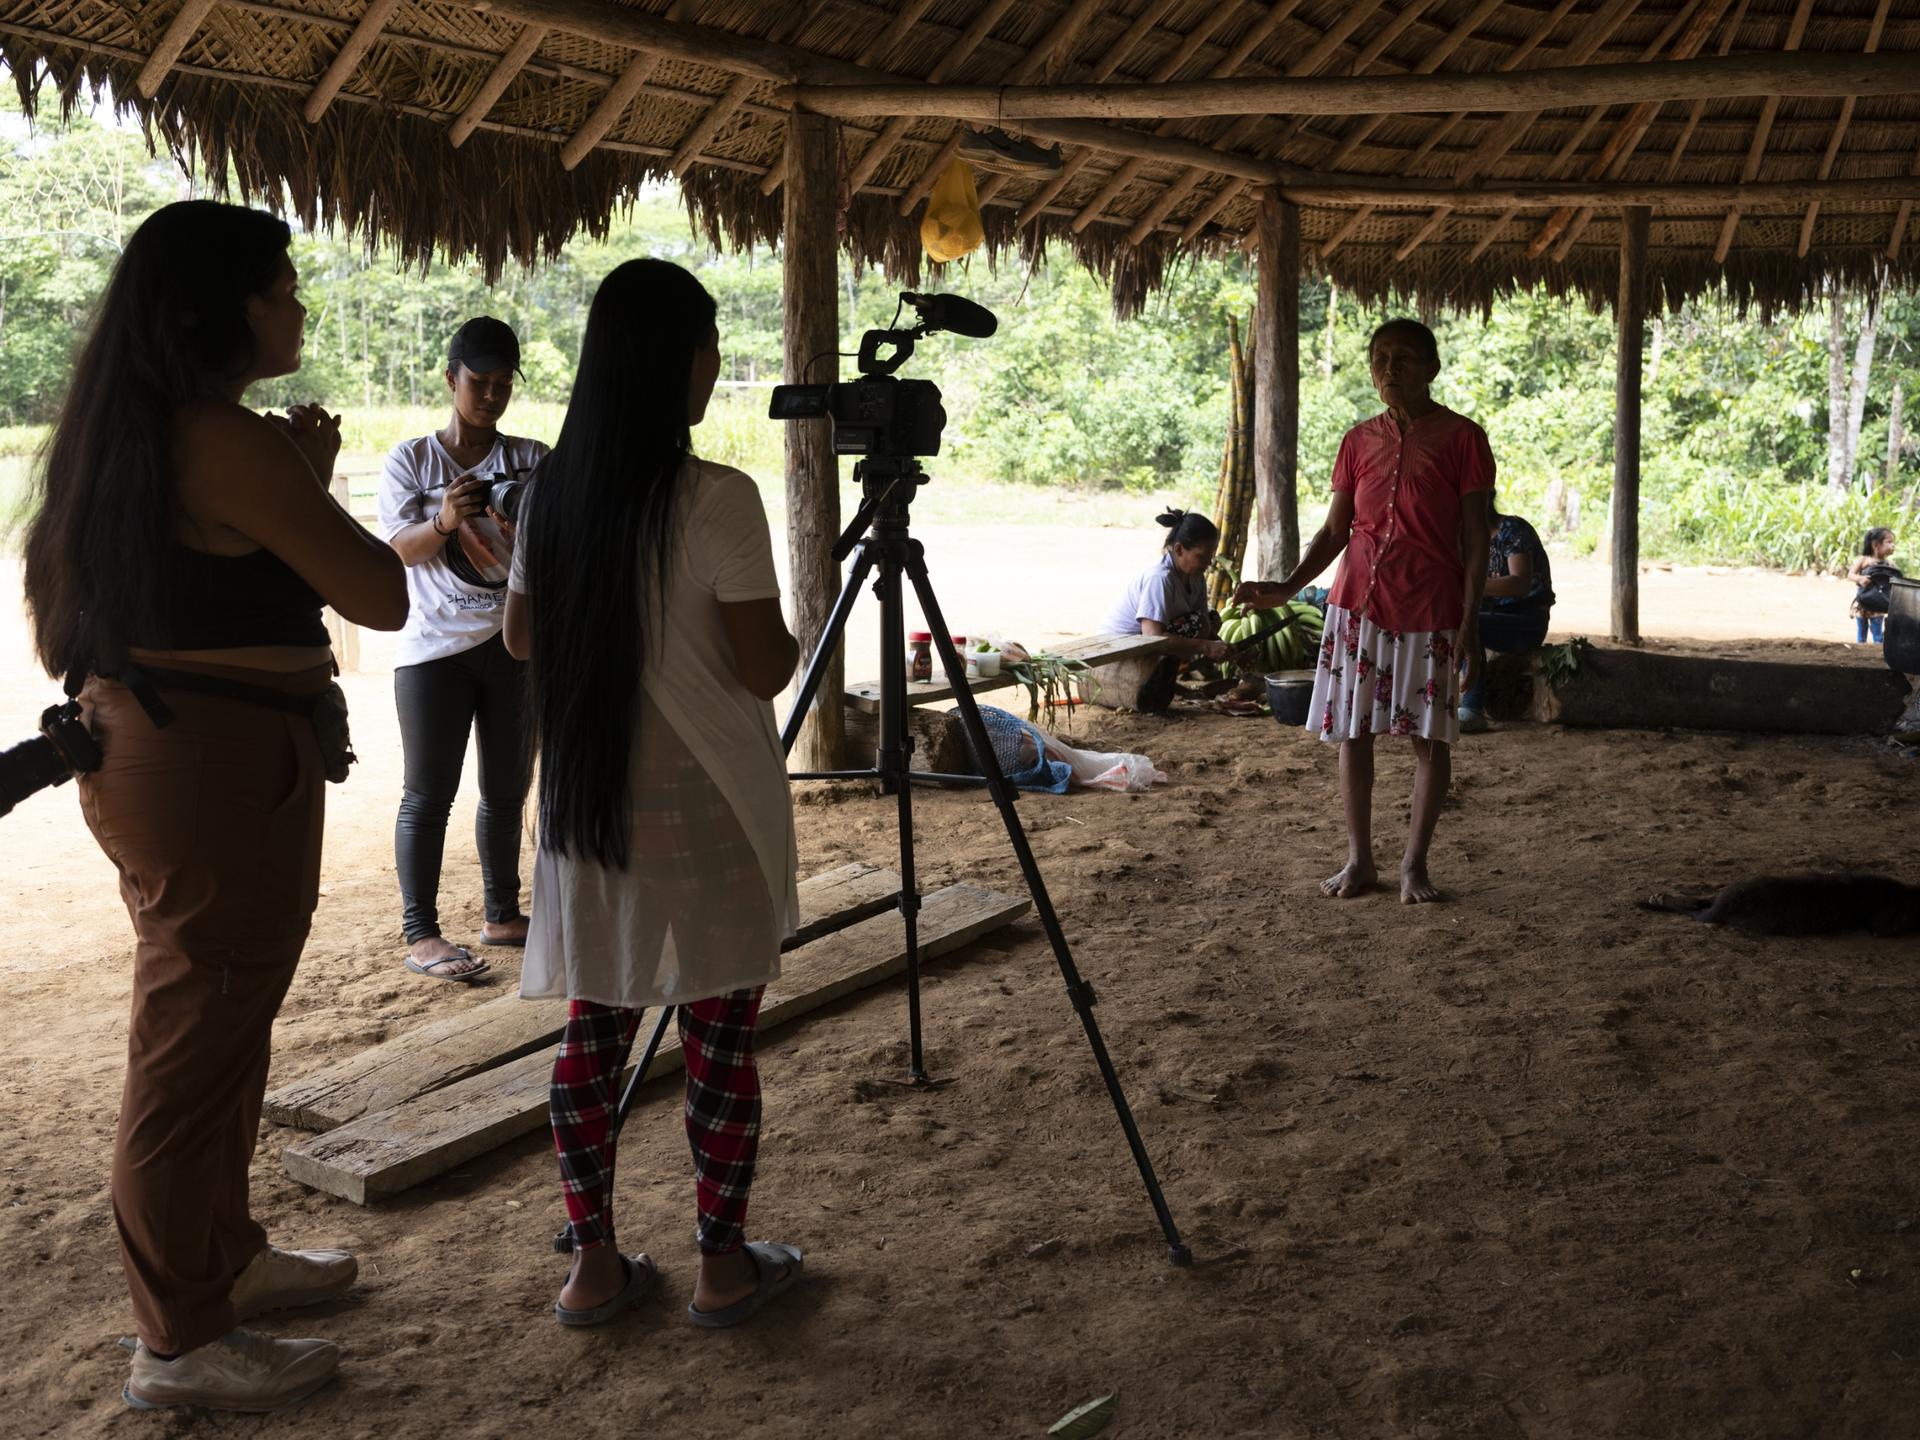 The films screened during the Kanua film festival in Ecuador were also produced by Indigenous communities.